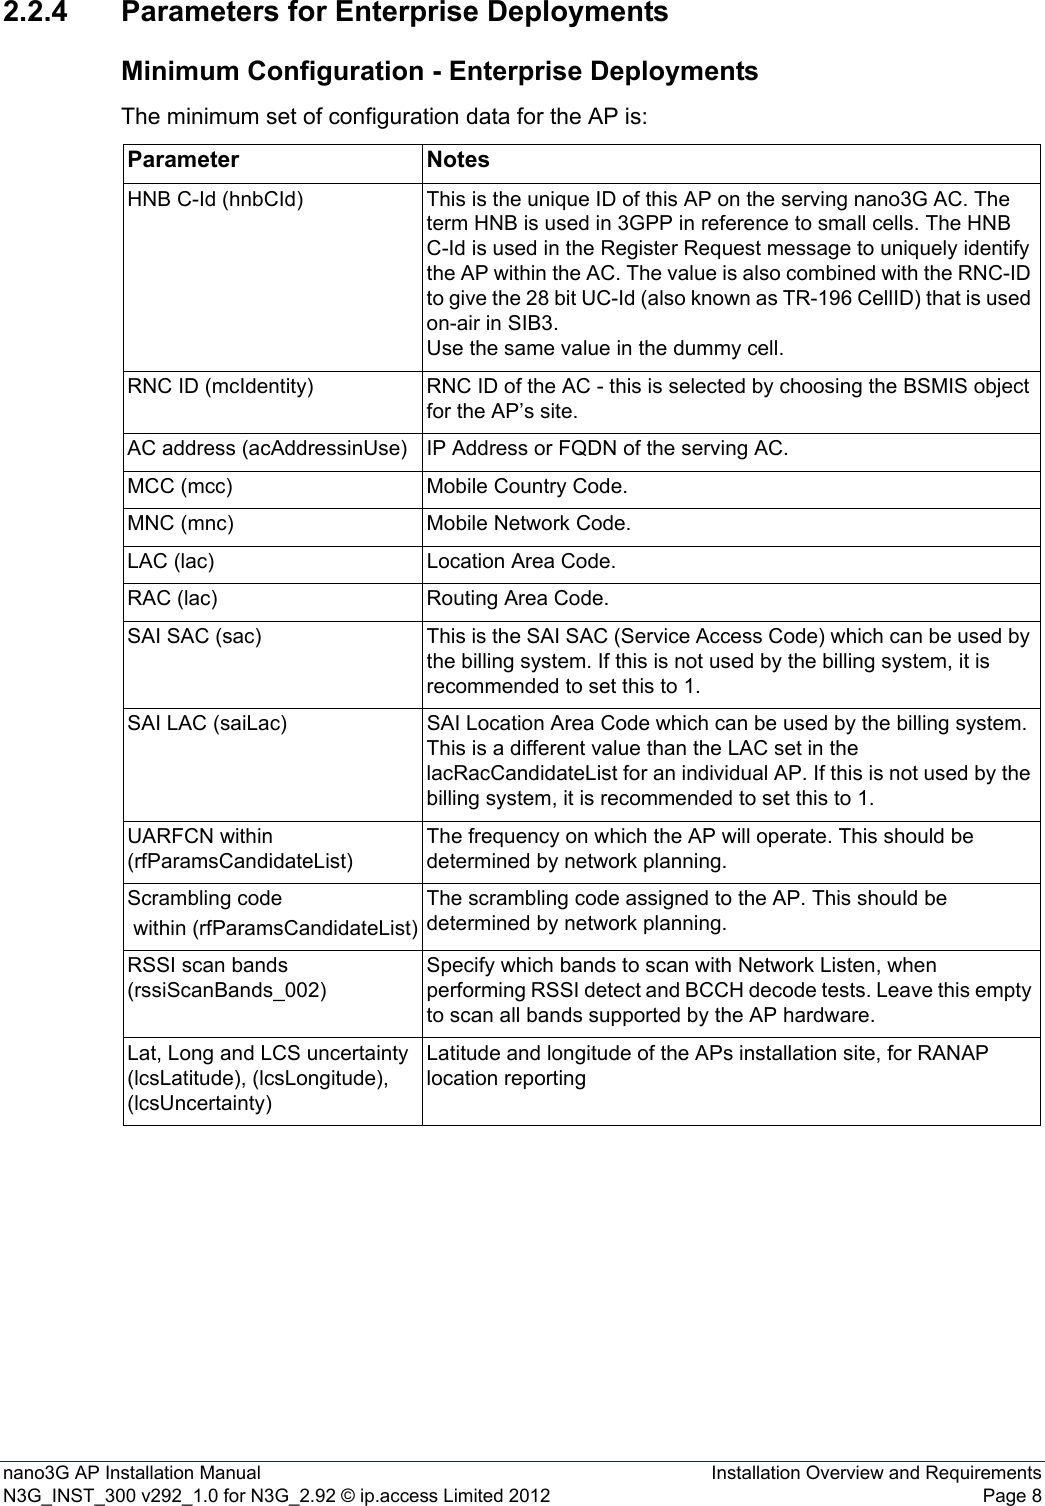 nano3G AP Installation Manual Installation Overview and RequirementsN3G_INST_300 v292_1.0 for N3G_2.92 © ip.access Limited 2012 Page 82.2.4 Parameters for Enterprise DeploymentsMinimum Configuration - Enterprise DeploymentsThe minimum set of configuration data for the AP is:Parameter NotesHNB C-Id (hnbCId) This is the unique ID of this AP on the serving nano3G AC. The term HNB is used in 3GPP in reference to small cells. The HNB C-Id is used in the Register Request message to uniquely identify the AP within the AC. The value is also combined with the RNC-ID to give the 28 bit UC-Id (also known as TR-196 CellID) that is used on-air in SIB3.Use the same value in the dummy cell.RNC ID (mcIdentity) RNC ID of the AC - this is selected by choosing the BSMIS object for the AP’s site.AC address (acAddressinUse) IP Address or FQDN of the serving AC.MCC (mcc) Mobile Country Code.MNC (mnc) Mobile Network Code.LAC (lac) Location Area Code.RAC (lac) Routing Area Code.SAI SAC (sac) This is the SAI SAC (Service Access Code) which can be used by the billing system. If this is not used by the billing system, it is recommended to set this to 1.SAI LAC (saiLac) SAI Location Area Code which can be used by the billing system. This is a different value than the LAC set in the lacRacCandidateList for an individual AP. If this is not used by the billing system, it is recommended to set this to 1. UARFCN within (rfParamsCandidateList)The frequency on which the AP will operate. This should be determined by network planning.Scrambling code within (rfParamsCandidateList)The scrambling code assigned to the AP. This should be determined by network planning.RSSI scan bands (rssiScanBands_002)Specify which bands to scan with Network Listen, when performing RSSI detect and BCCH decode tests. Leave this empty to scan all bands supported by the AP hardware. Lat, Long and LCS uncertainty (lcsLatitude), (lcsLongitude), (lcsUncertainty)Latitude and longitude of the APs installation site, for RANAP location reporting